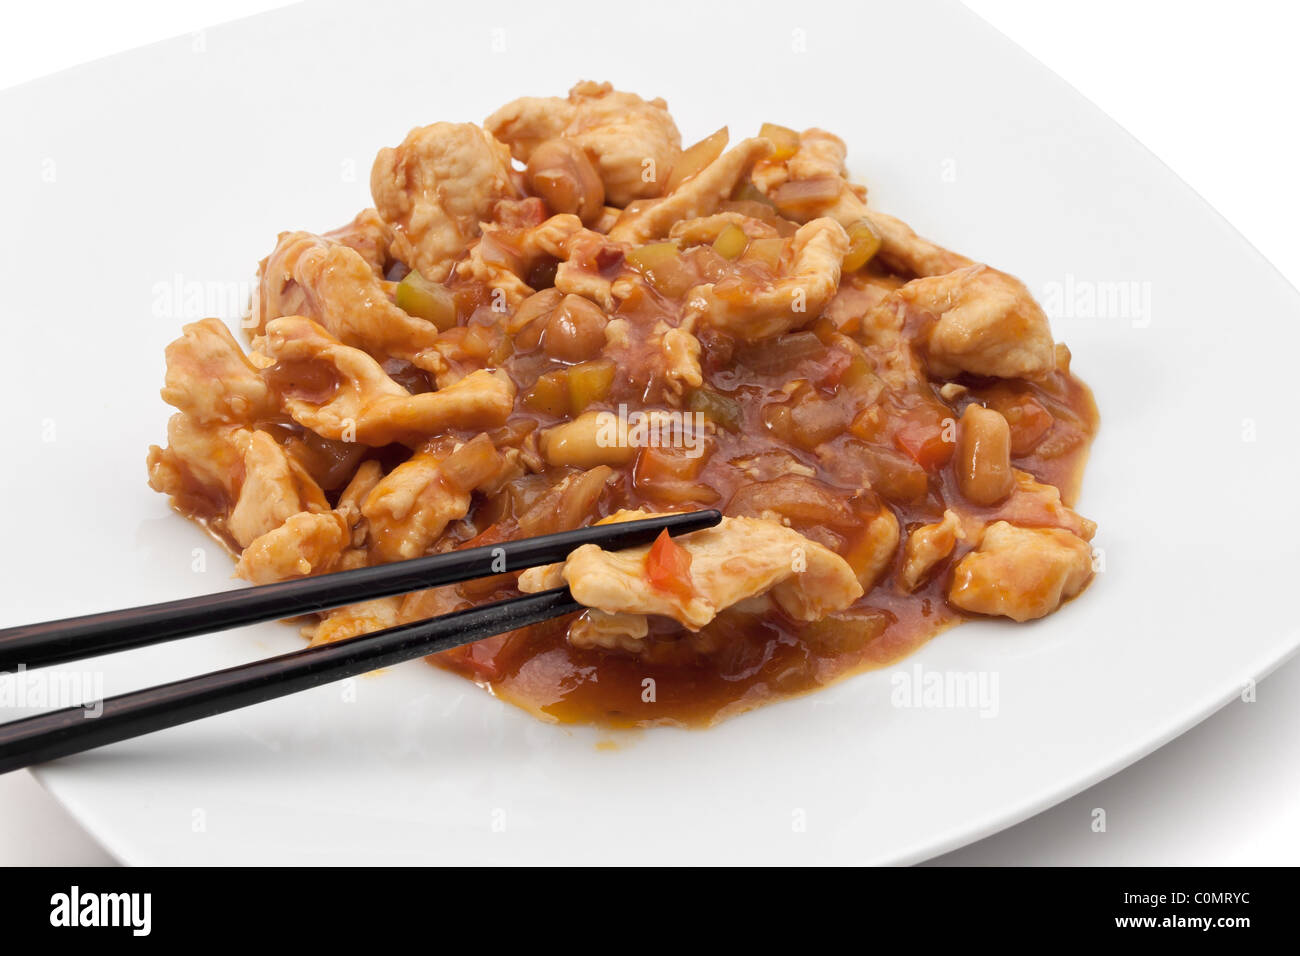 plate with chicken in hot sauce isolated on white background with clipping path Stock Photo